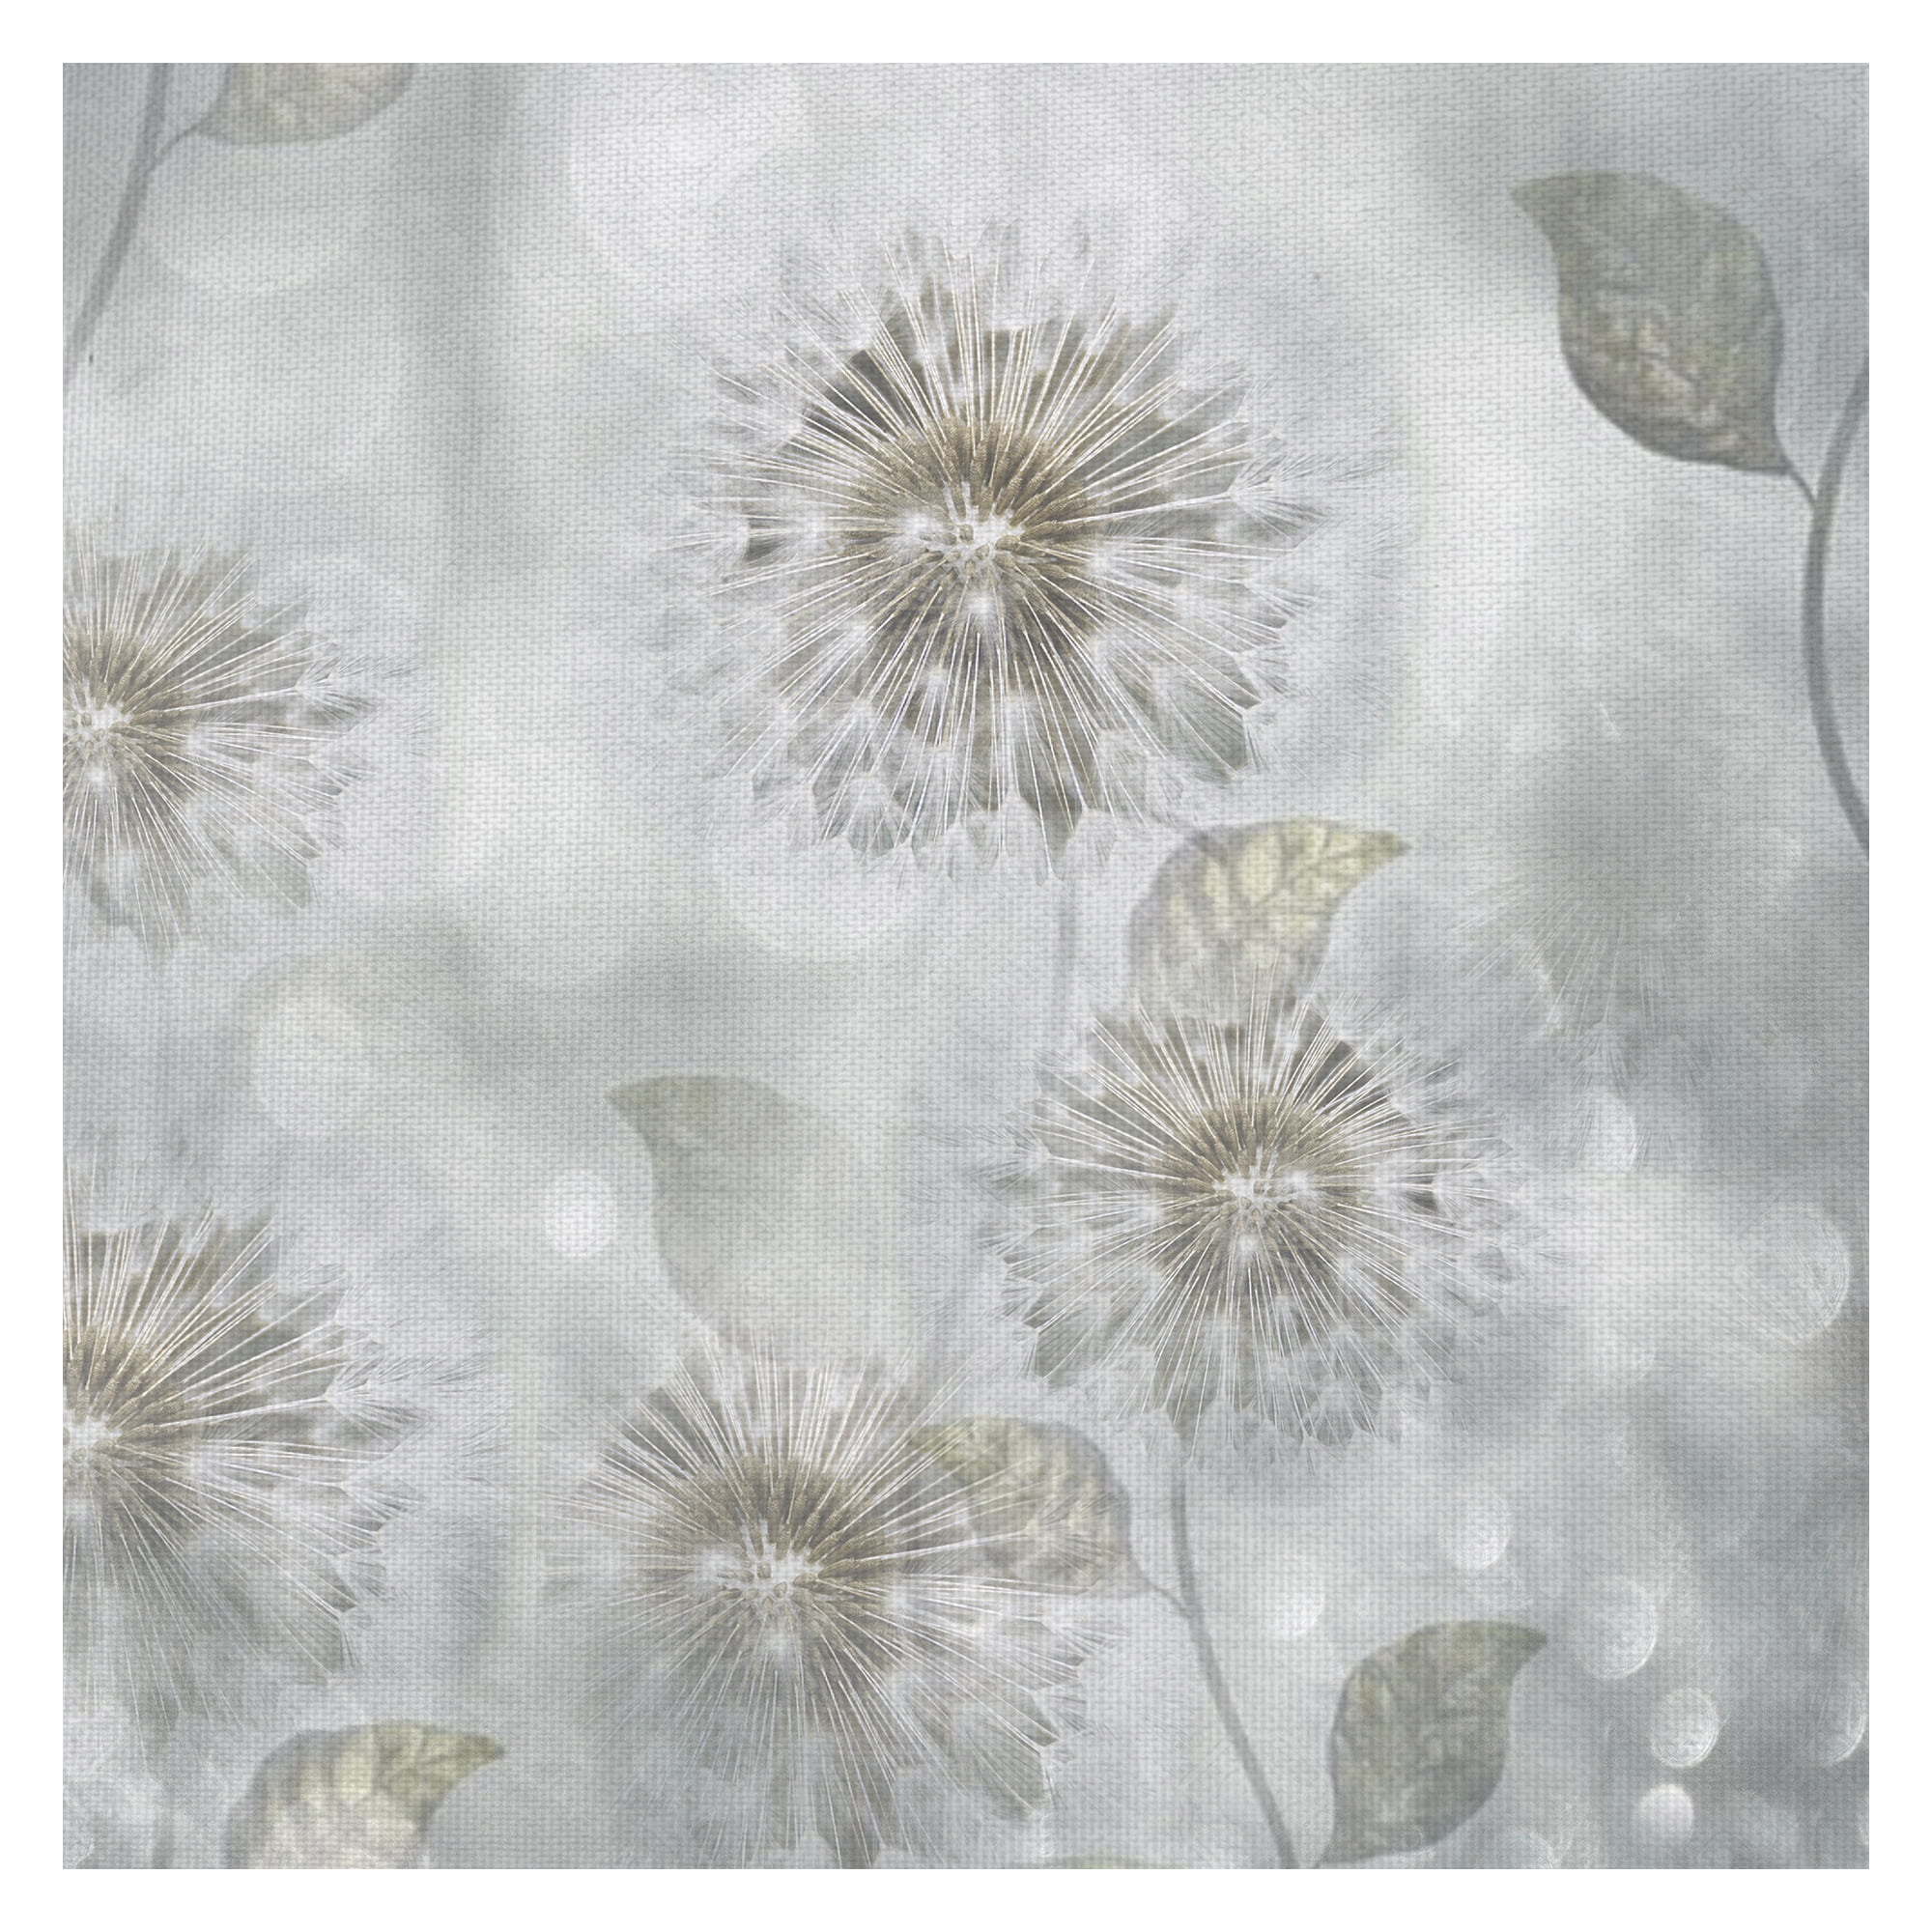 9.5x7.9 inches Natural Rubber Mouse Pad Printed with Dandelion Seeds Blowing Away in The Wind Stitched Edges dealzEpic Art Mousepad